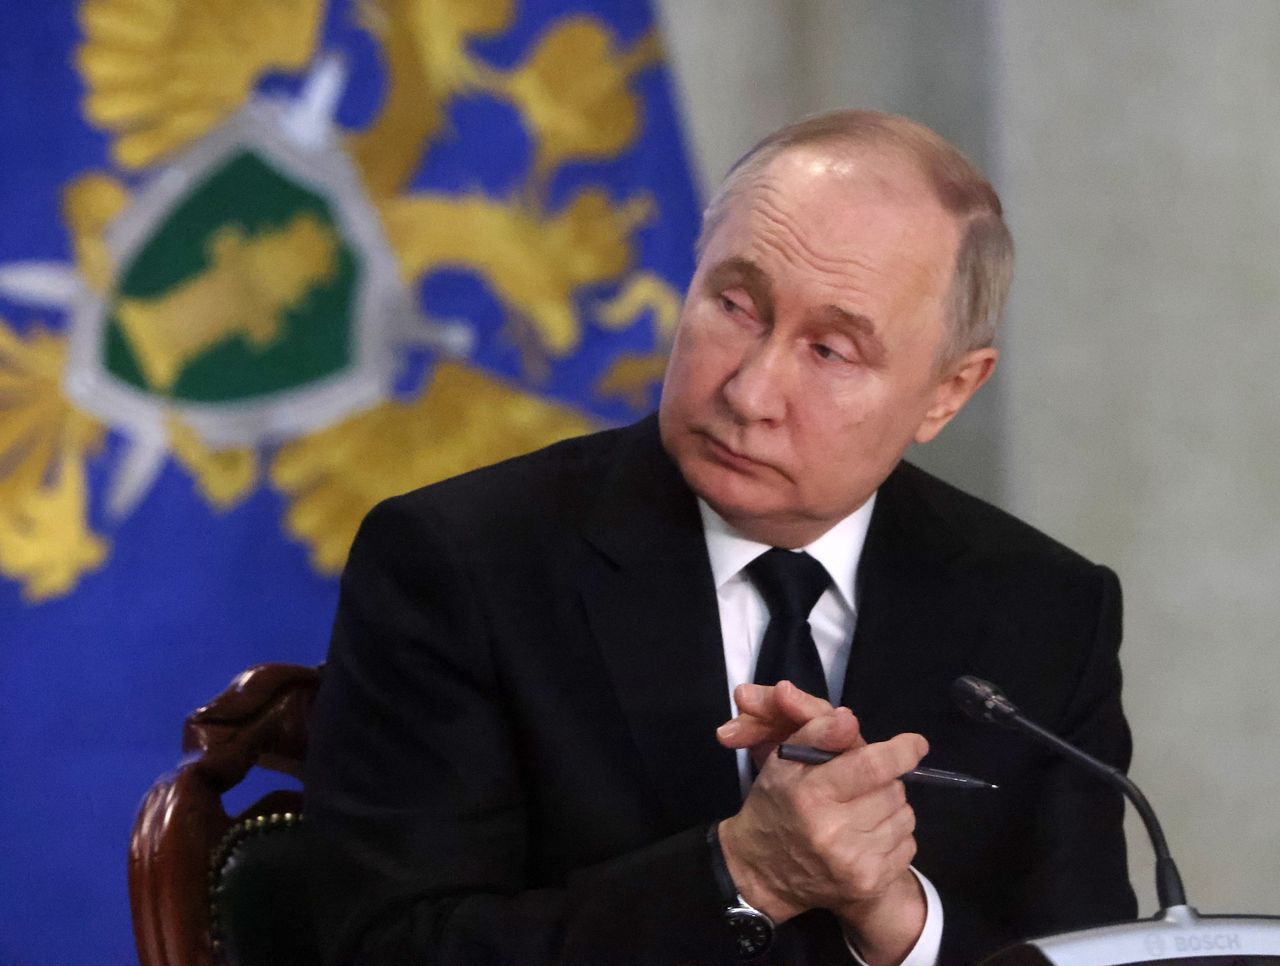 Putin secures fifth term aiming to intensify Ukraine conflict and suppress dissent